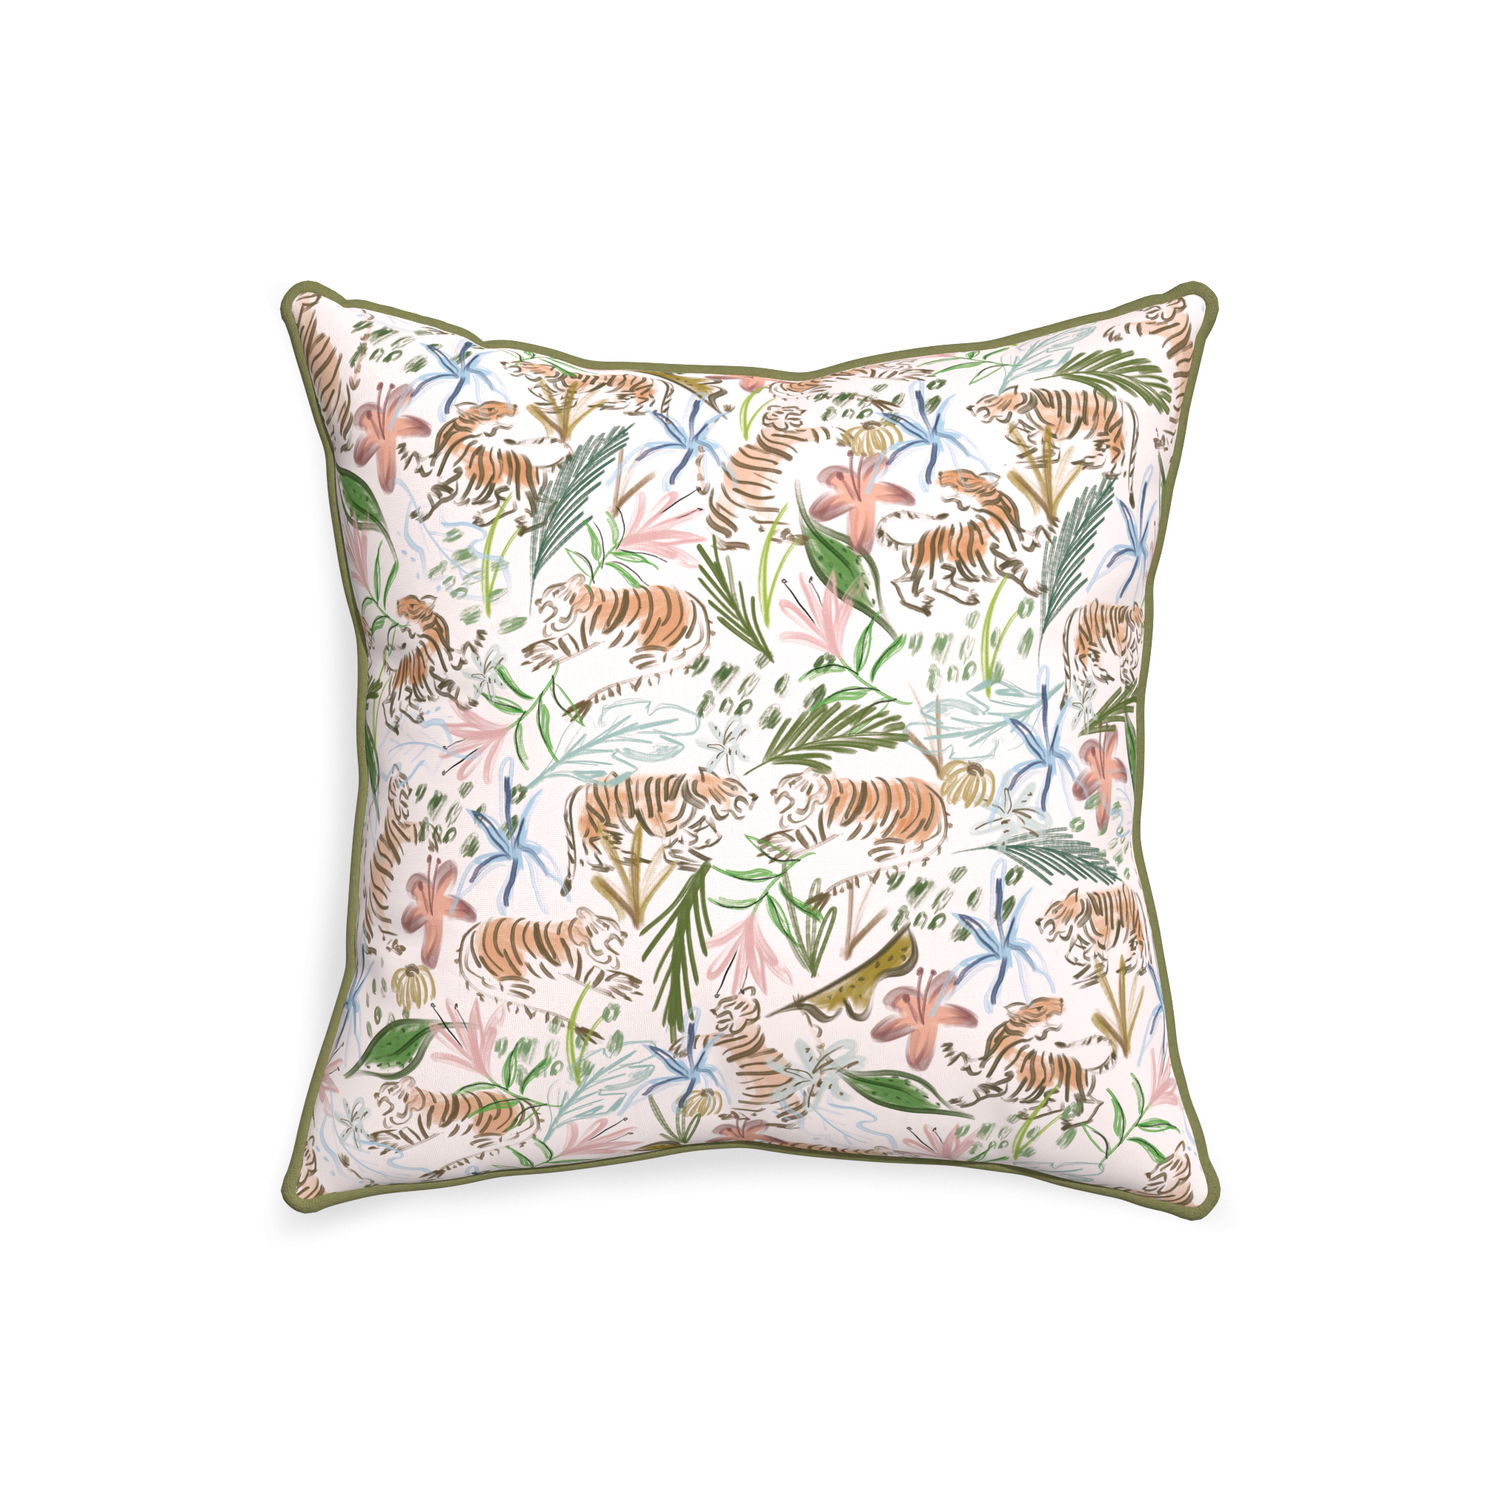 20-square frida pink custom pink chinoiserie tigerpillow with moss piping on white background